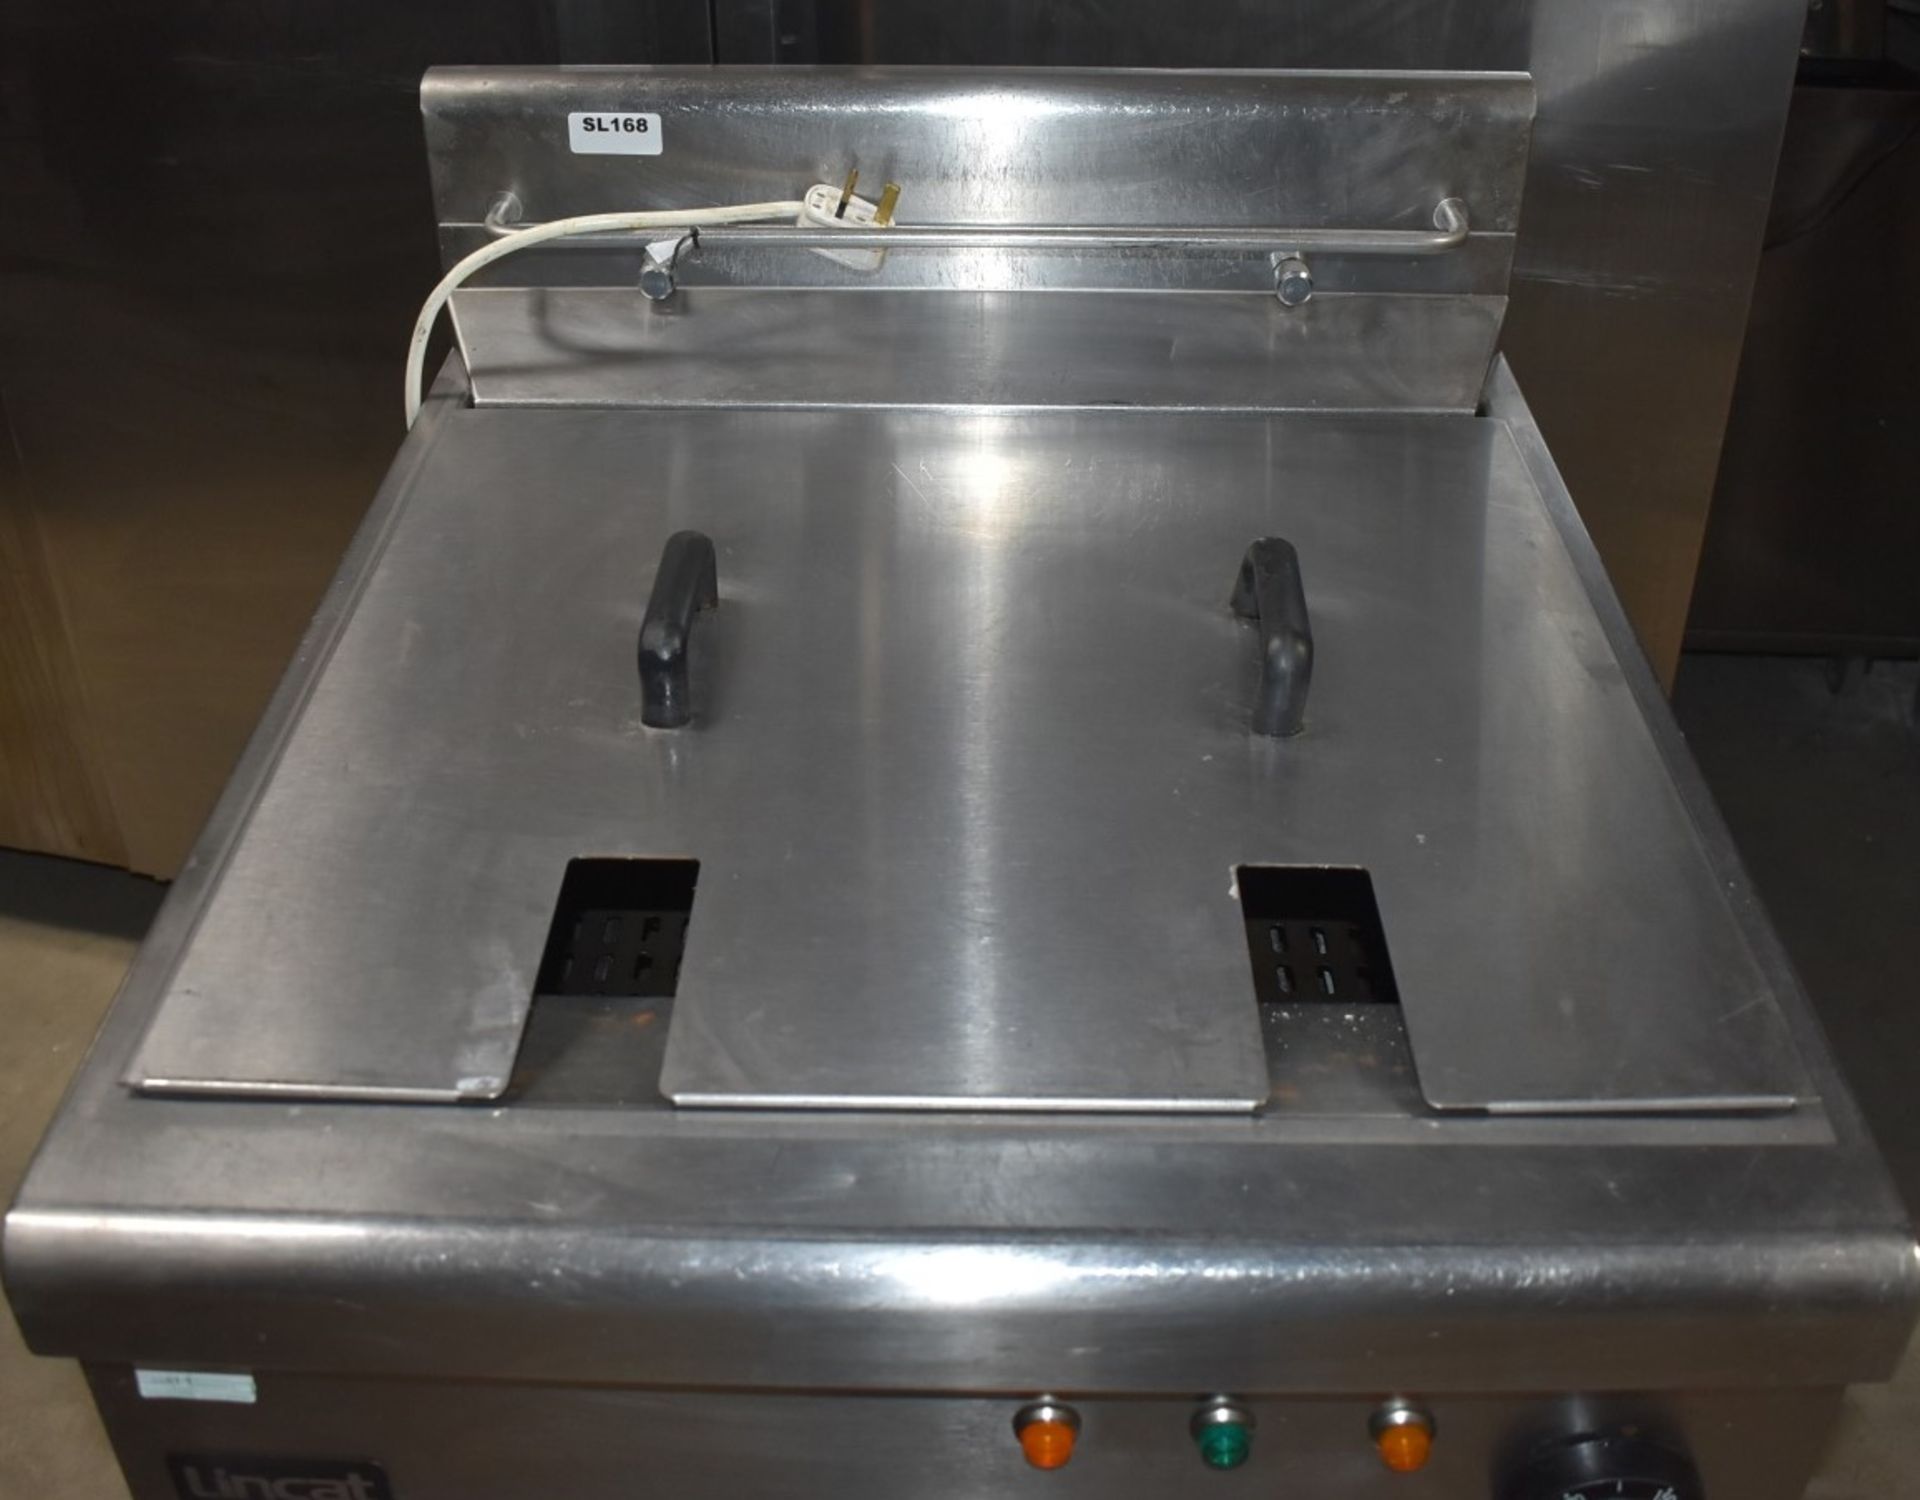 1 x Lincat Opus 700 Single Tank Electric Fryer With Built In Filtration - 3 Phase - Image 16 of 19